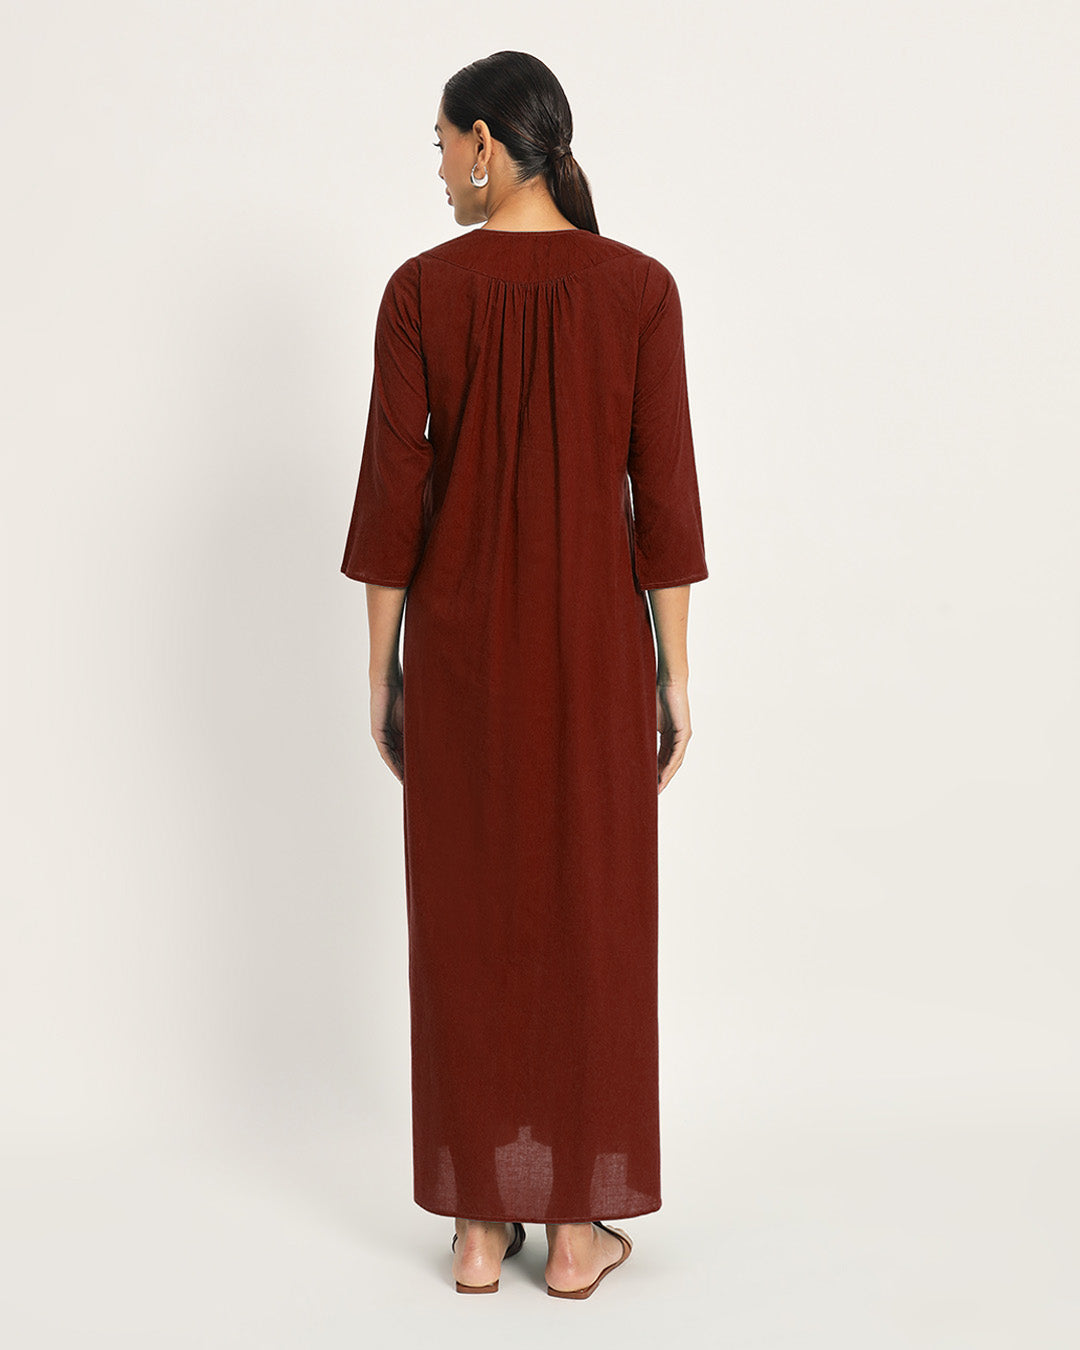 Combo: Russet Red & Sage Green Nighttime Must-Have Nightdress